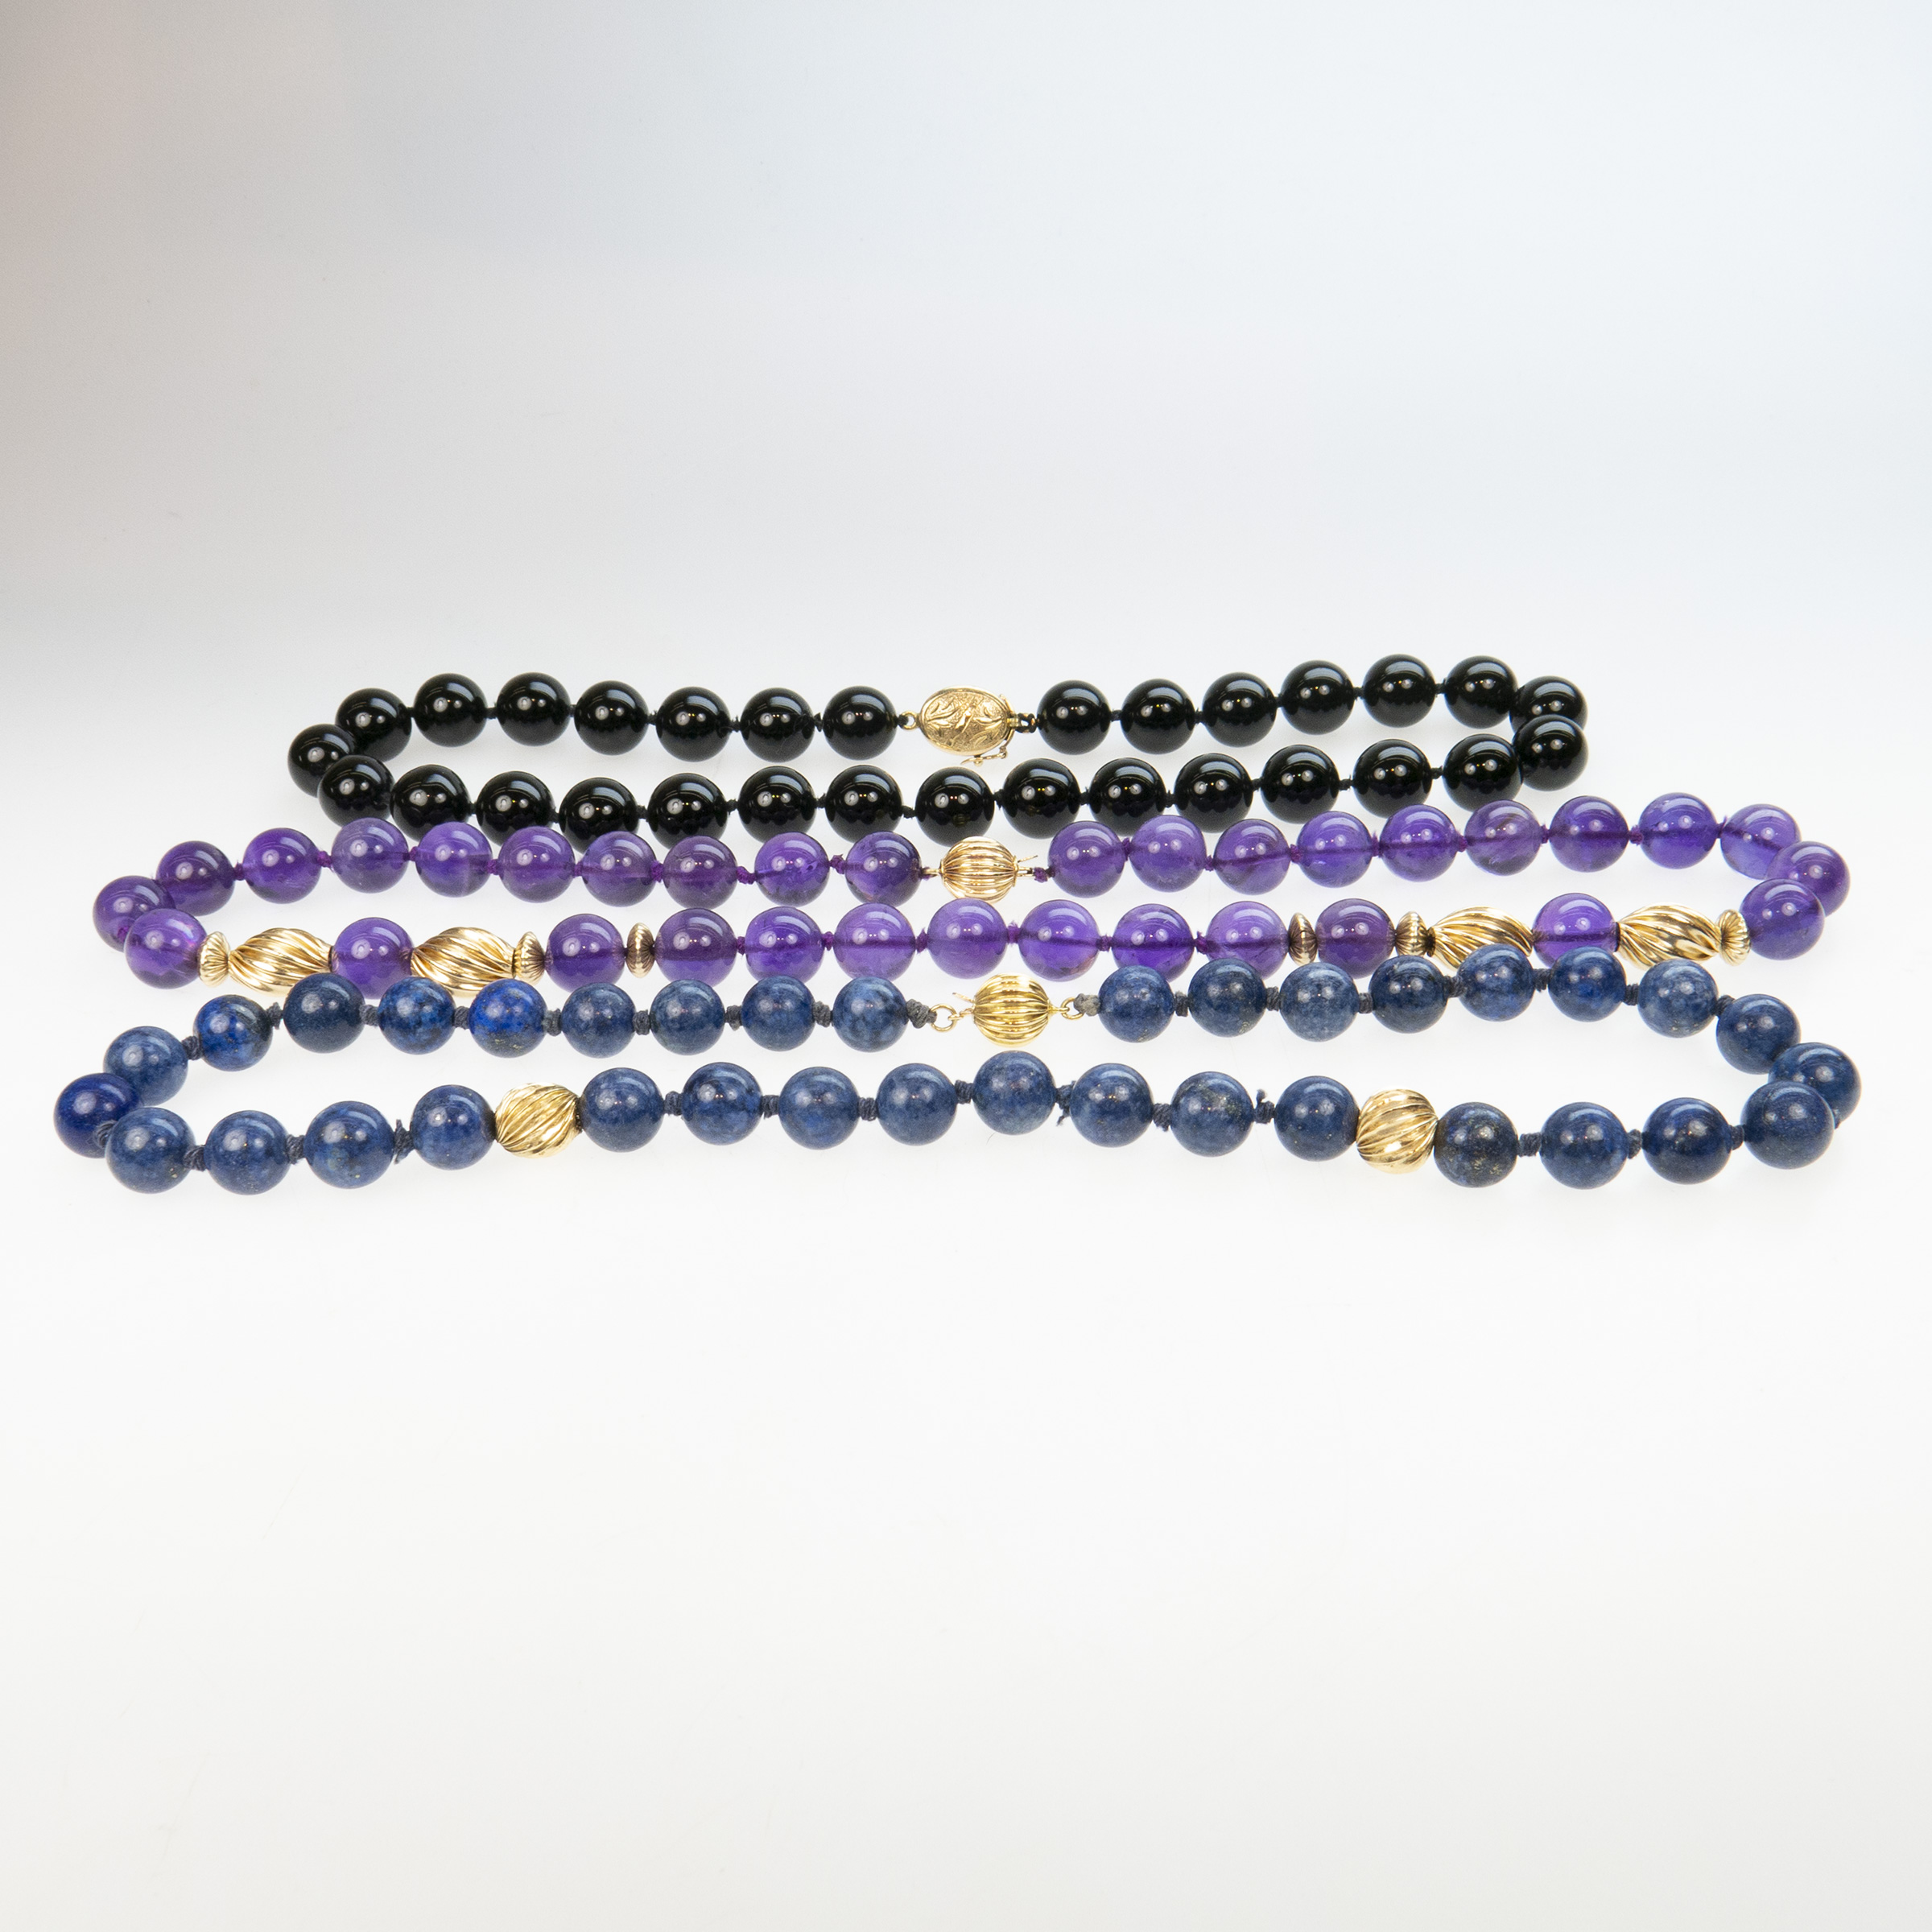 Single Strand Onyx, Amethyst And Lapis Necklaces